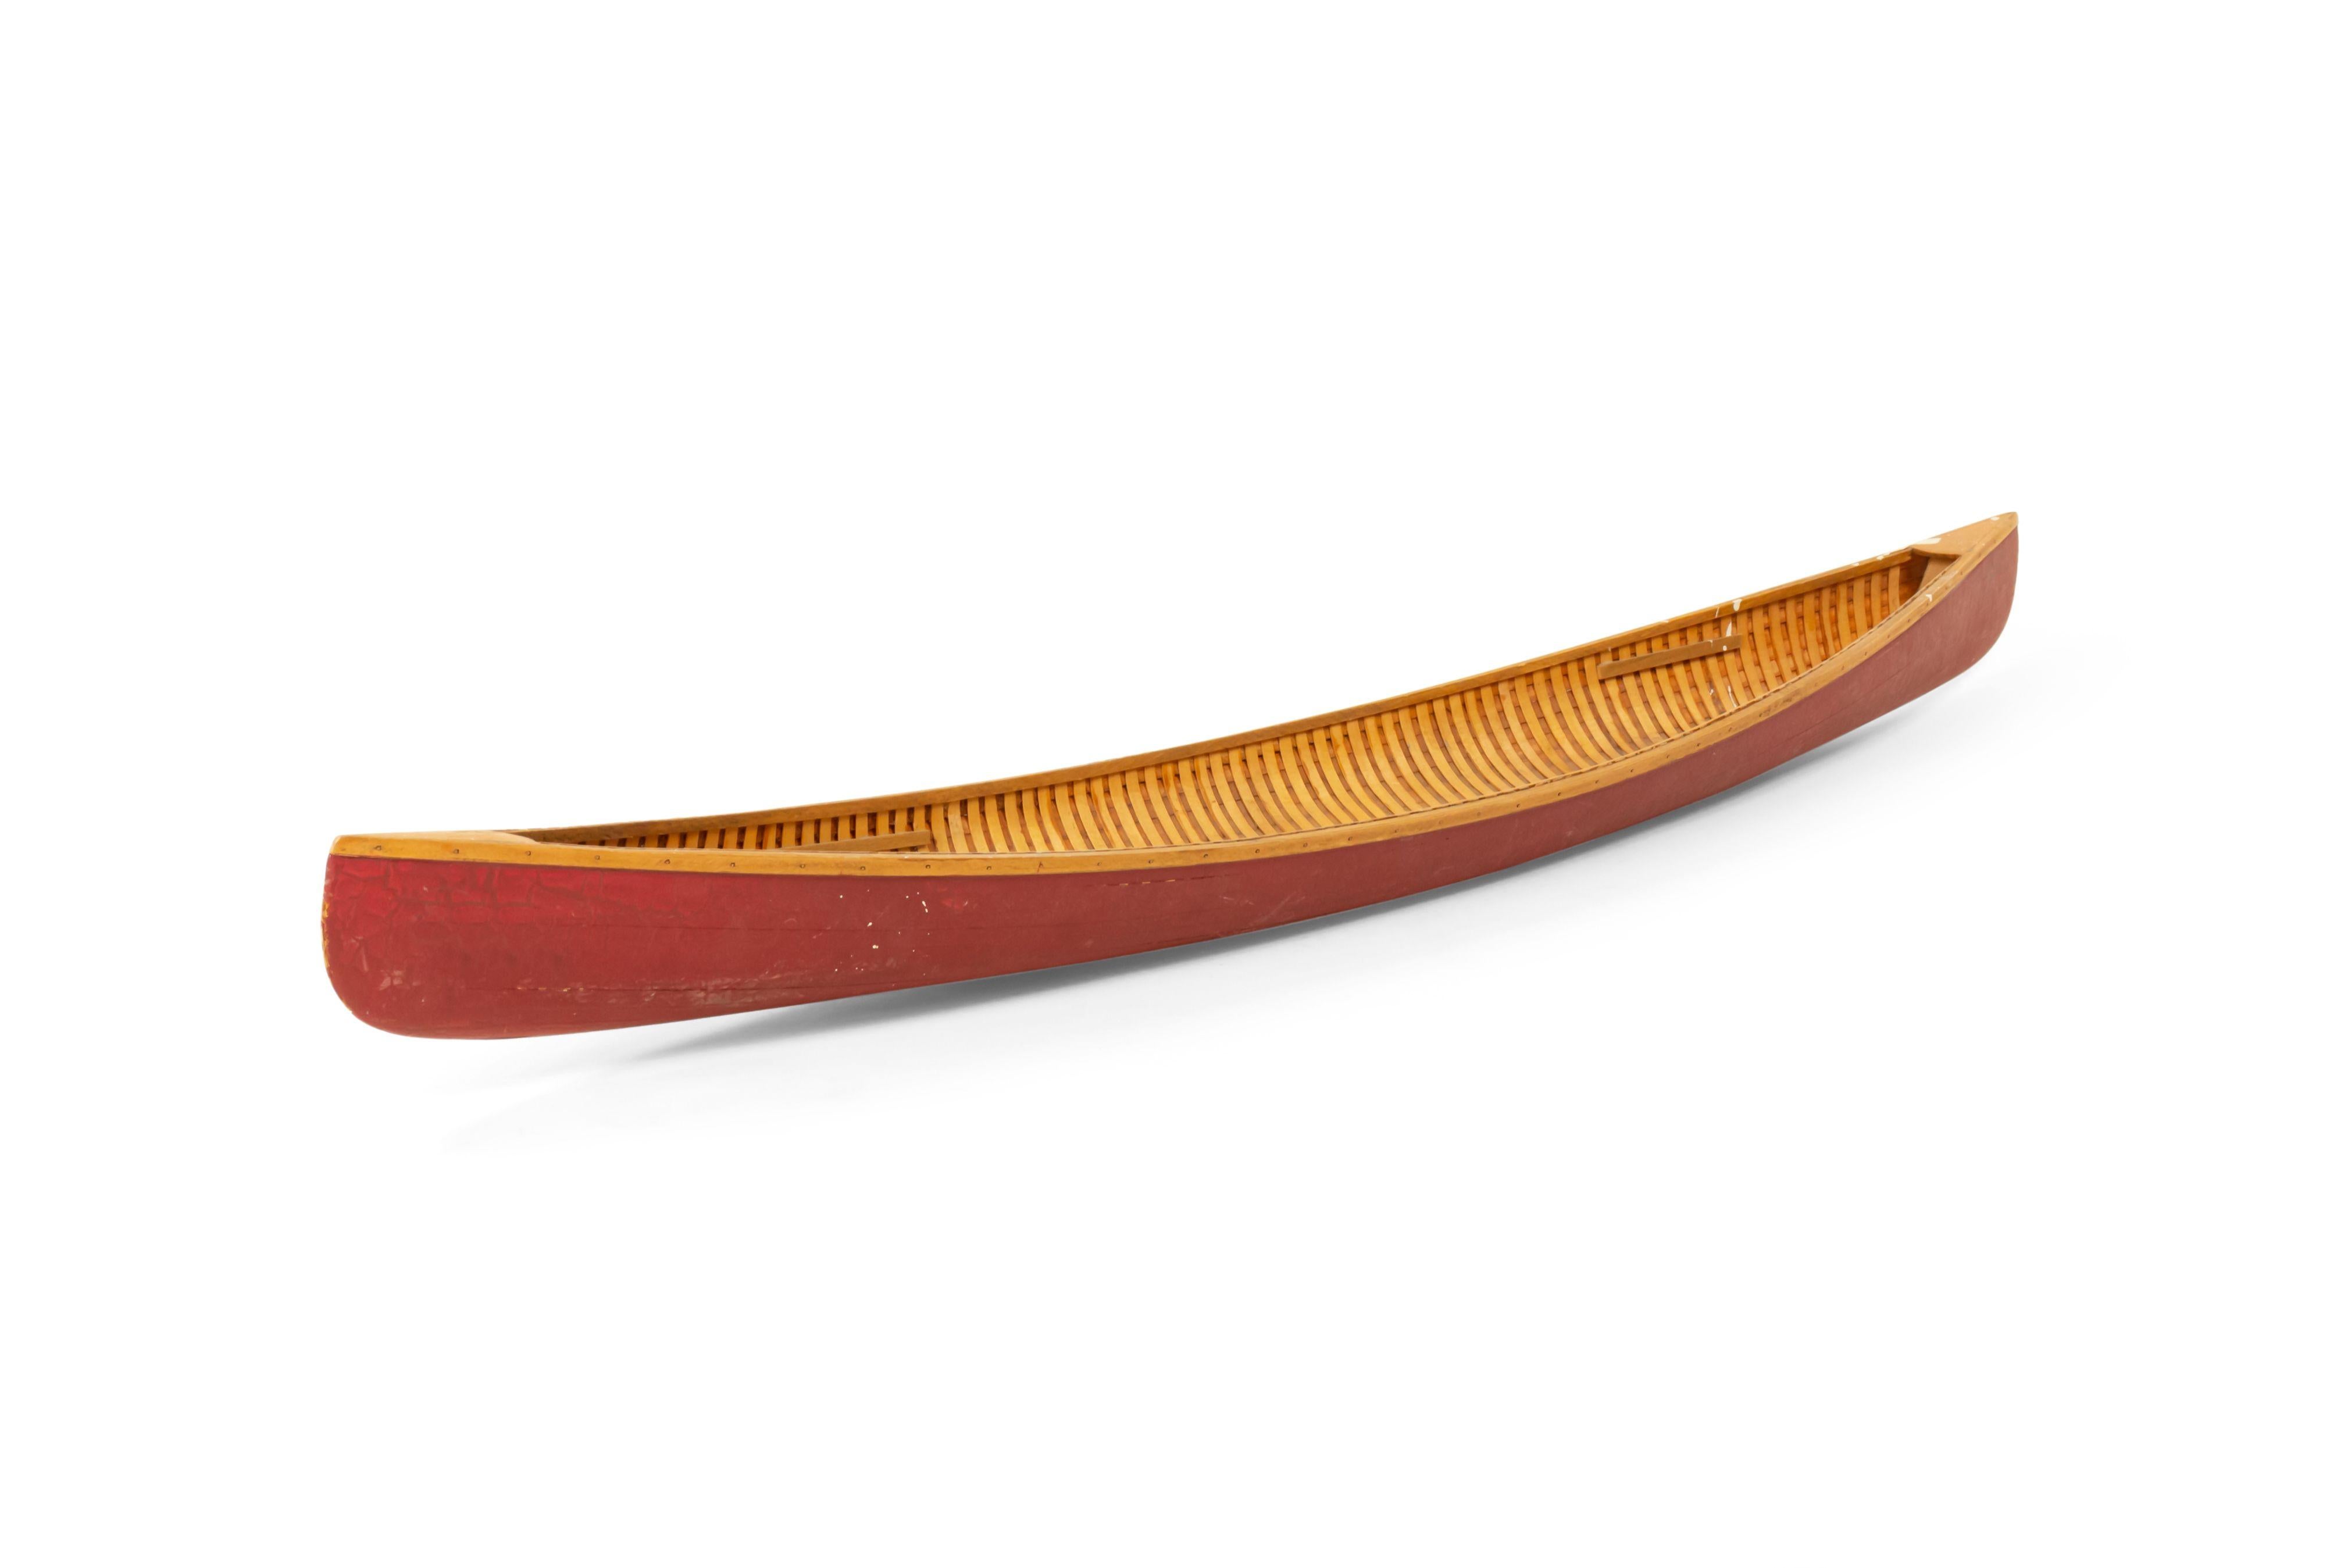 Rustic Painted Wooden Canoe Model 2